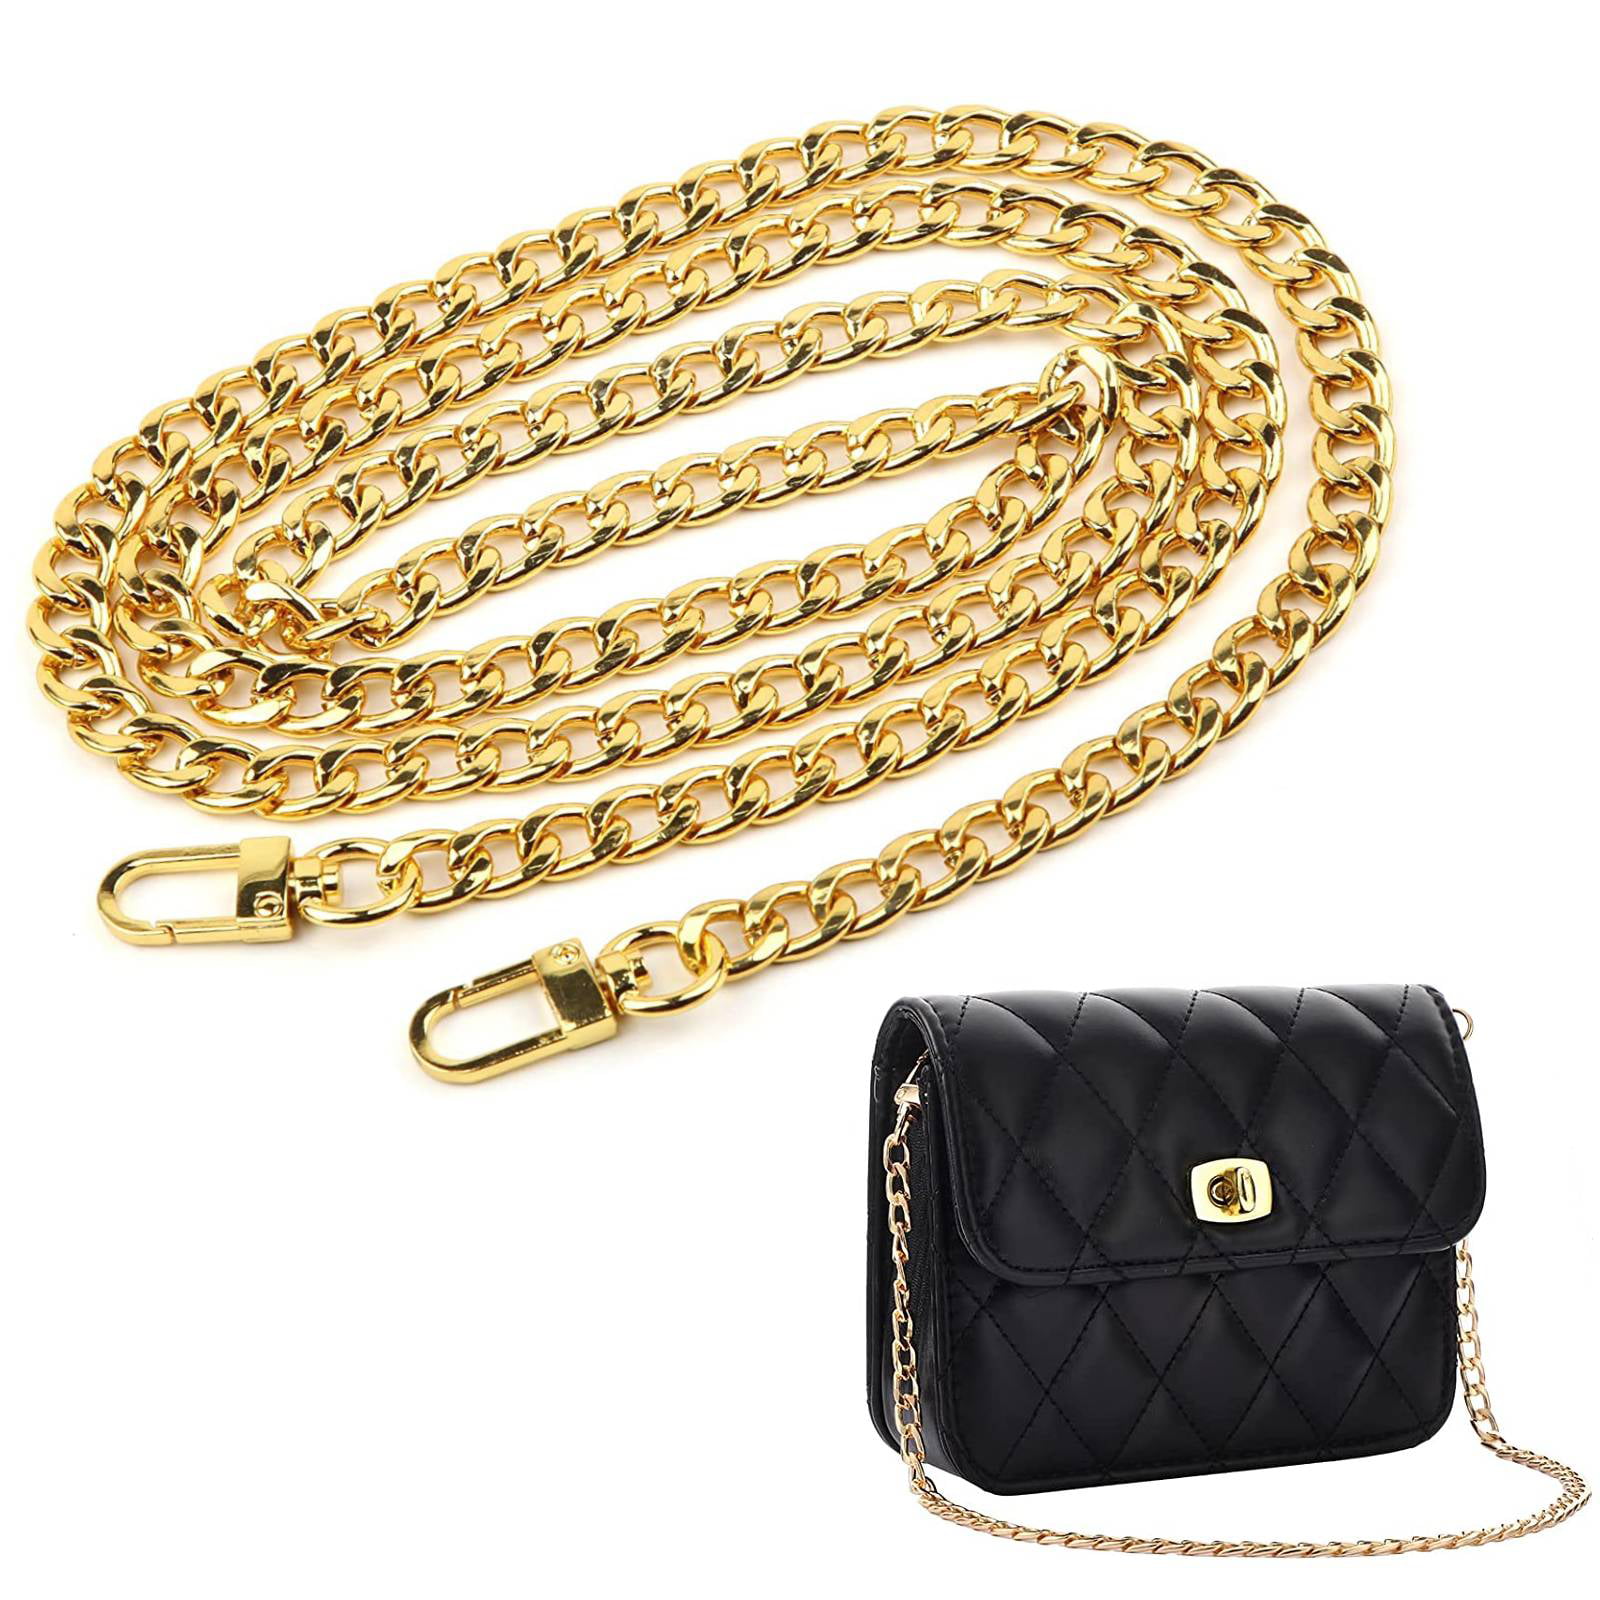 Strap You Leather Stud Bag  Strap Removable For Bag Purses  Gold Clips 